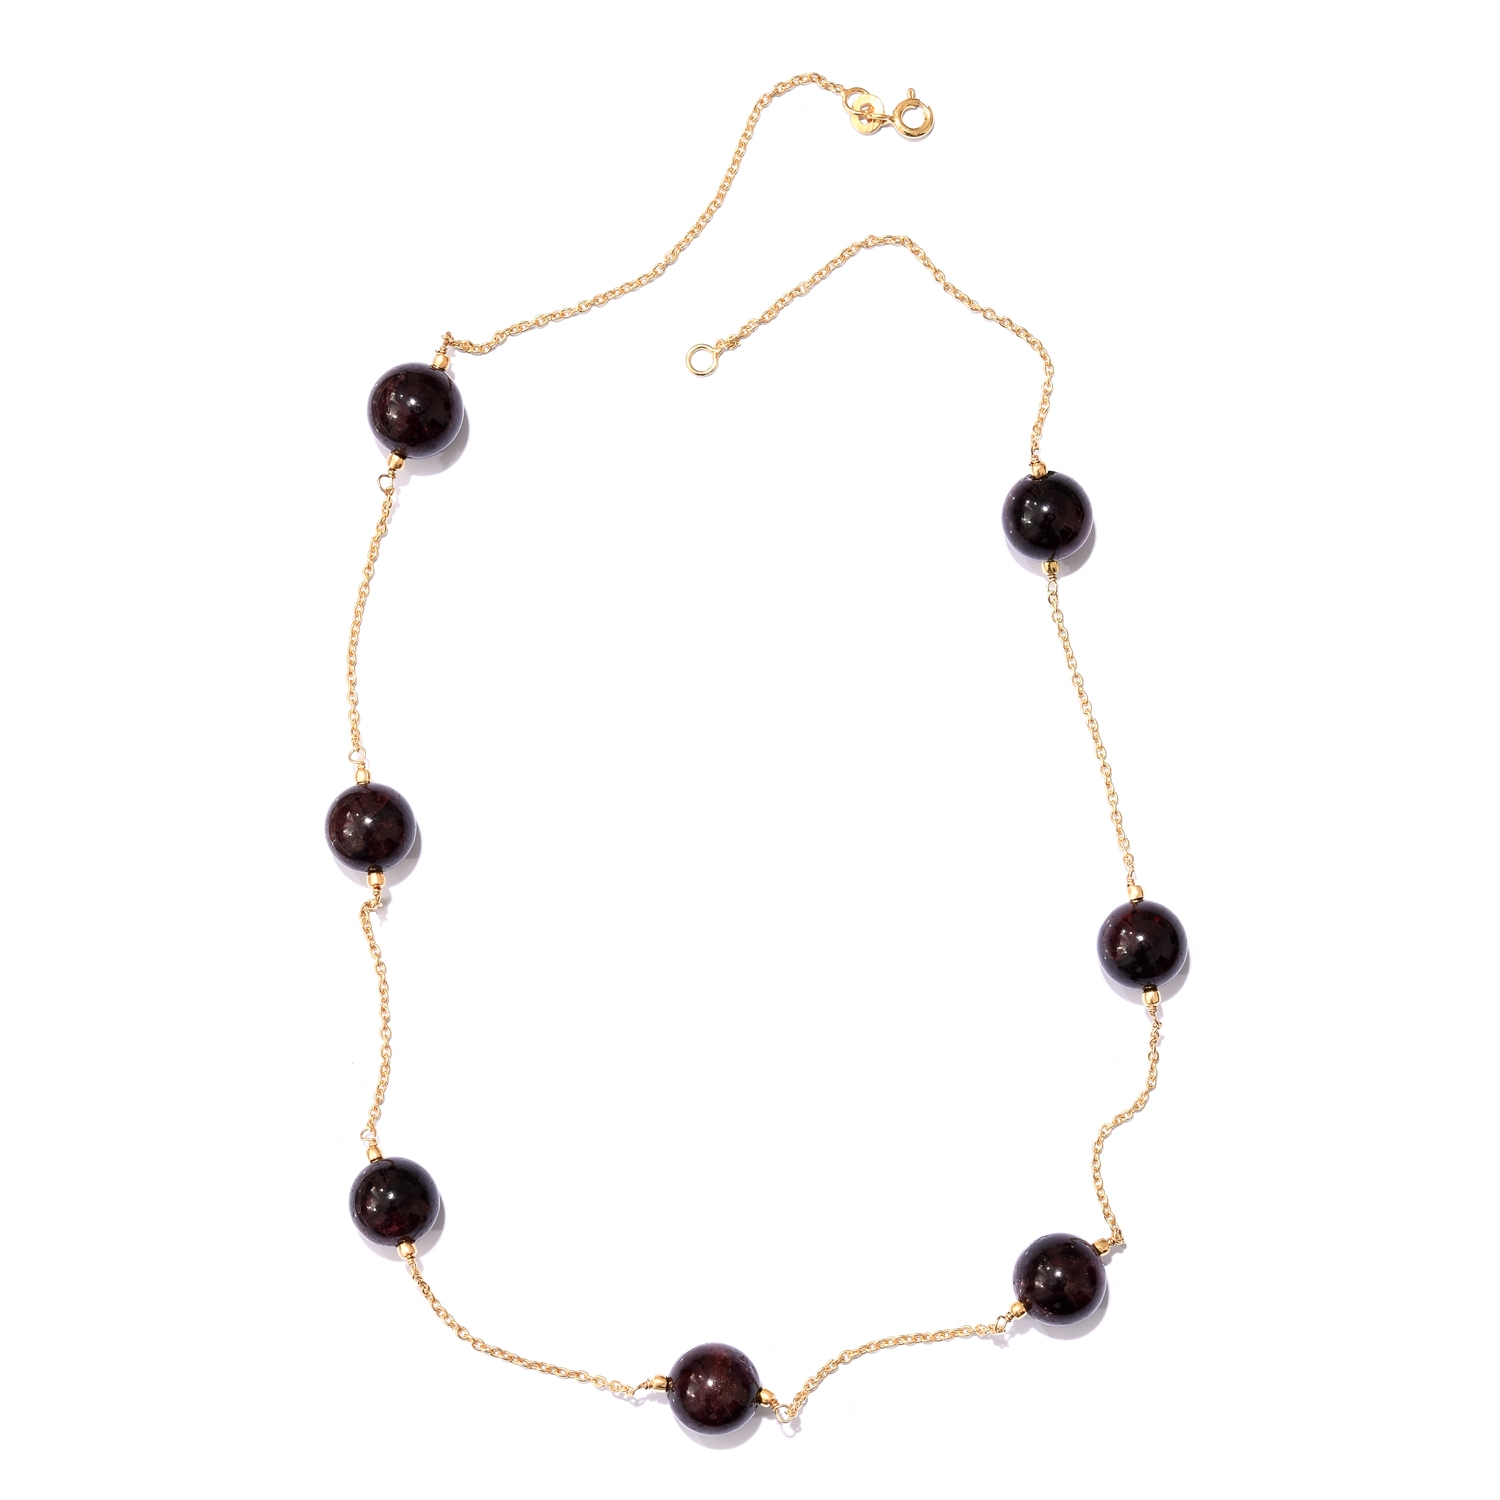 Mozambique Garnet 14K YG Over Sterling Silver Necklace (20 in) TGW 85.00 cts. - Houzz of DVA Boutique